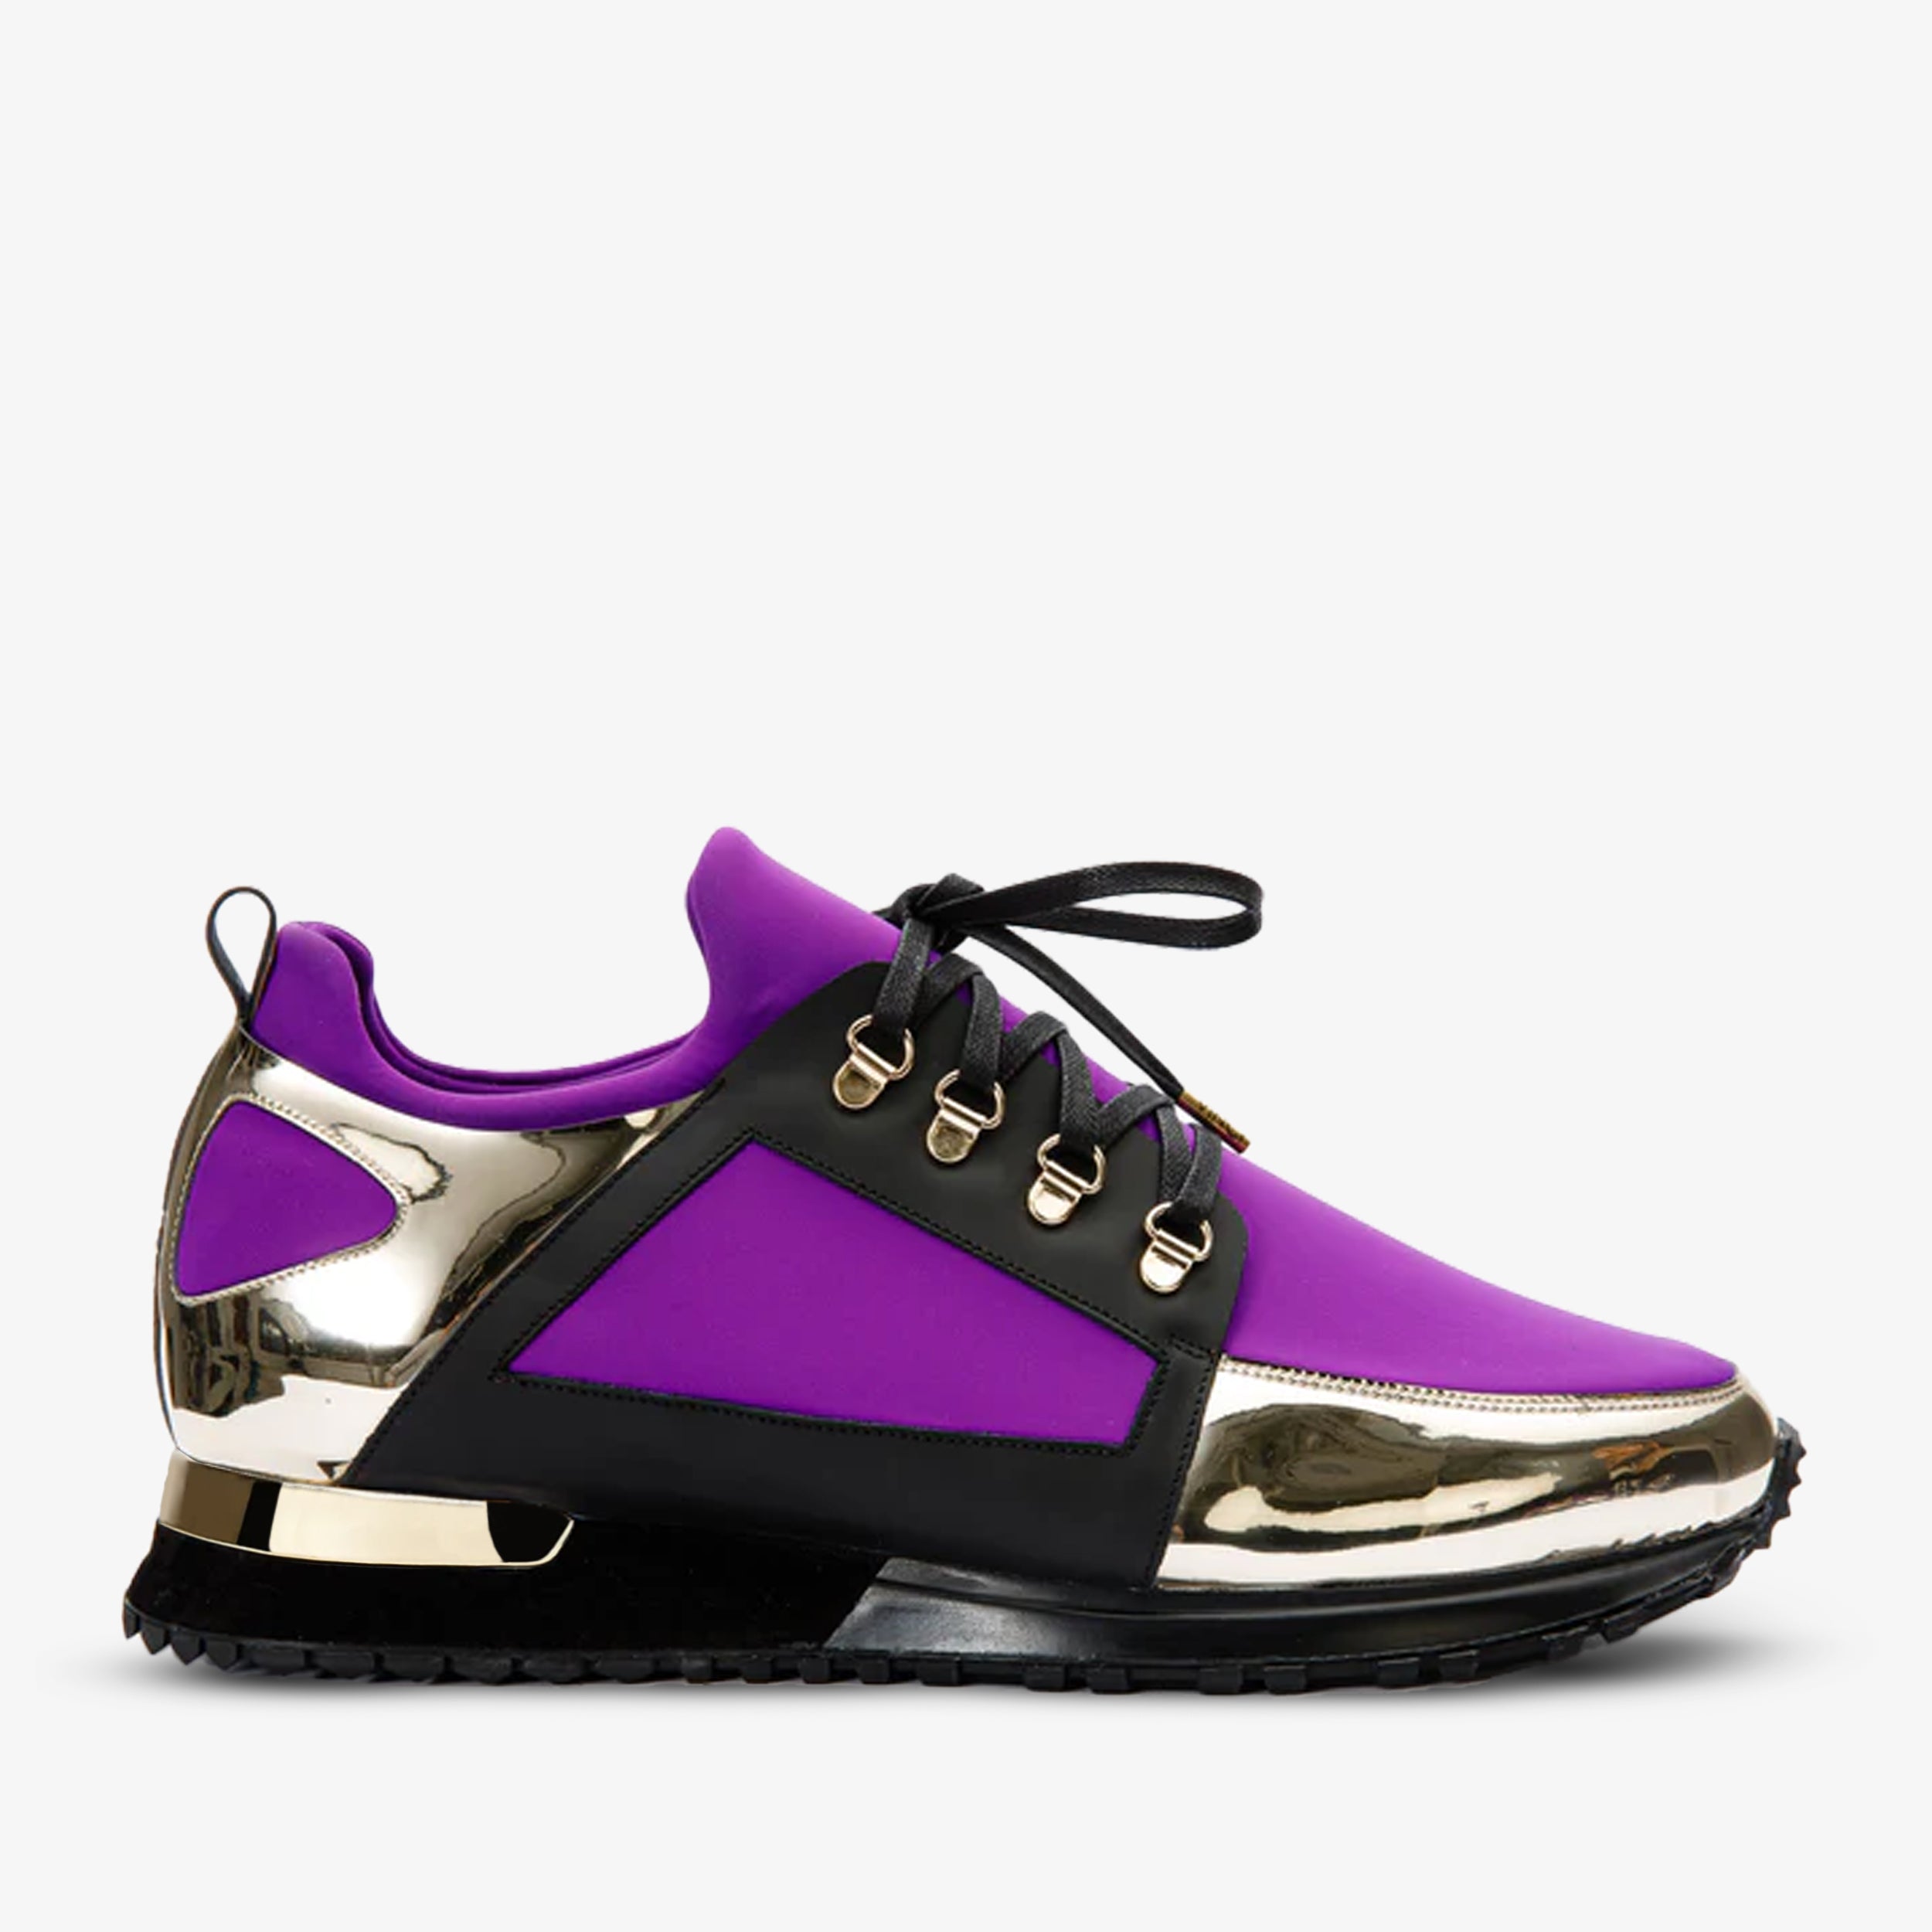 The Emir Purple Leather Women Sneaker Limited Edition